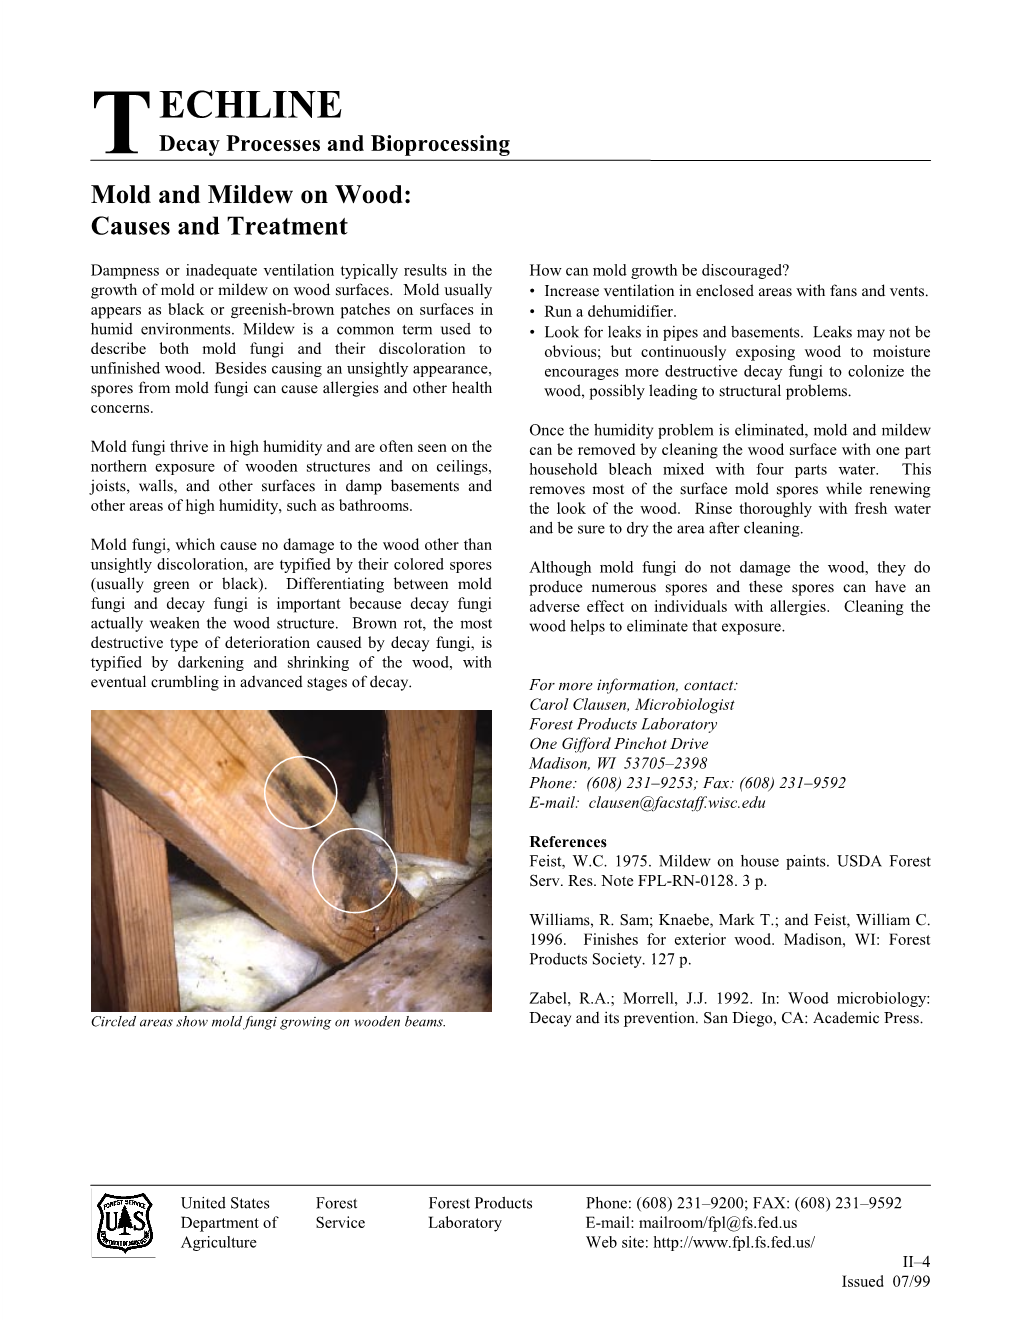 Mold and Mildew on Wood: Causes and Treatment